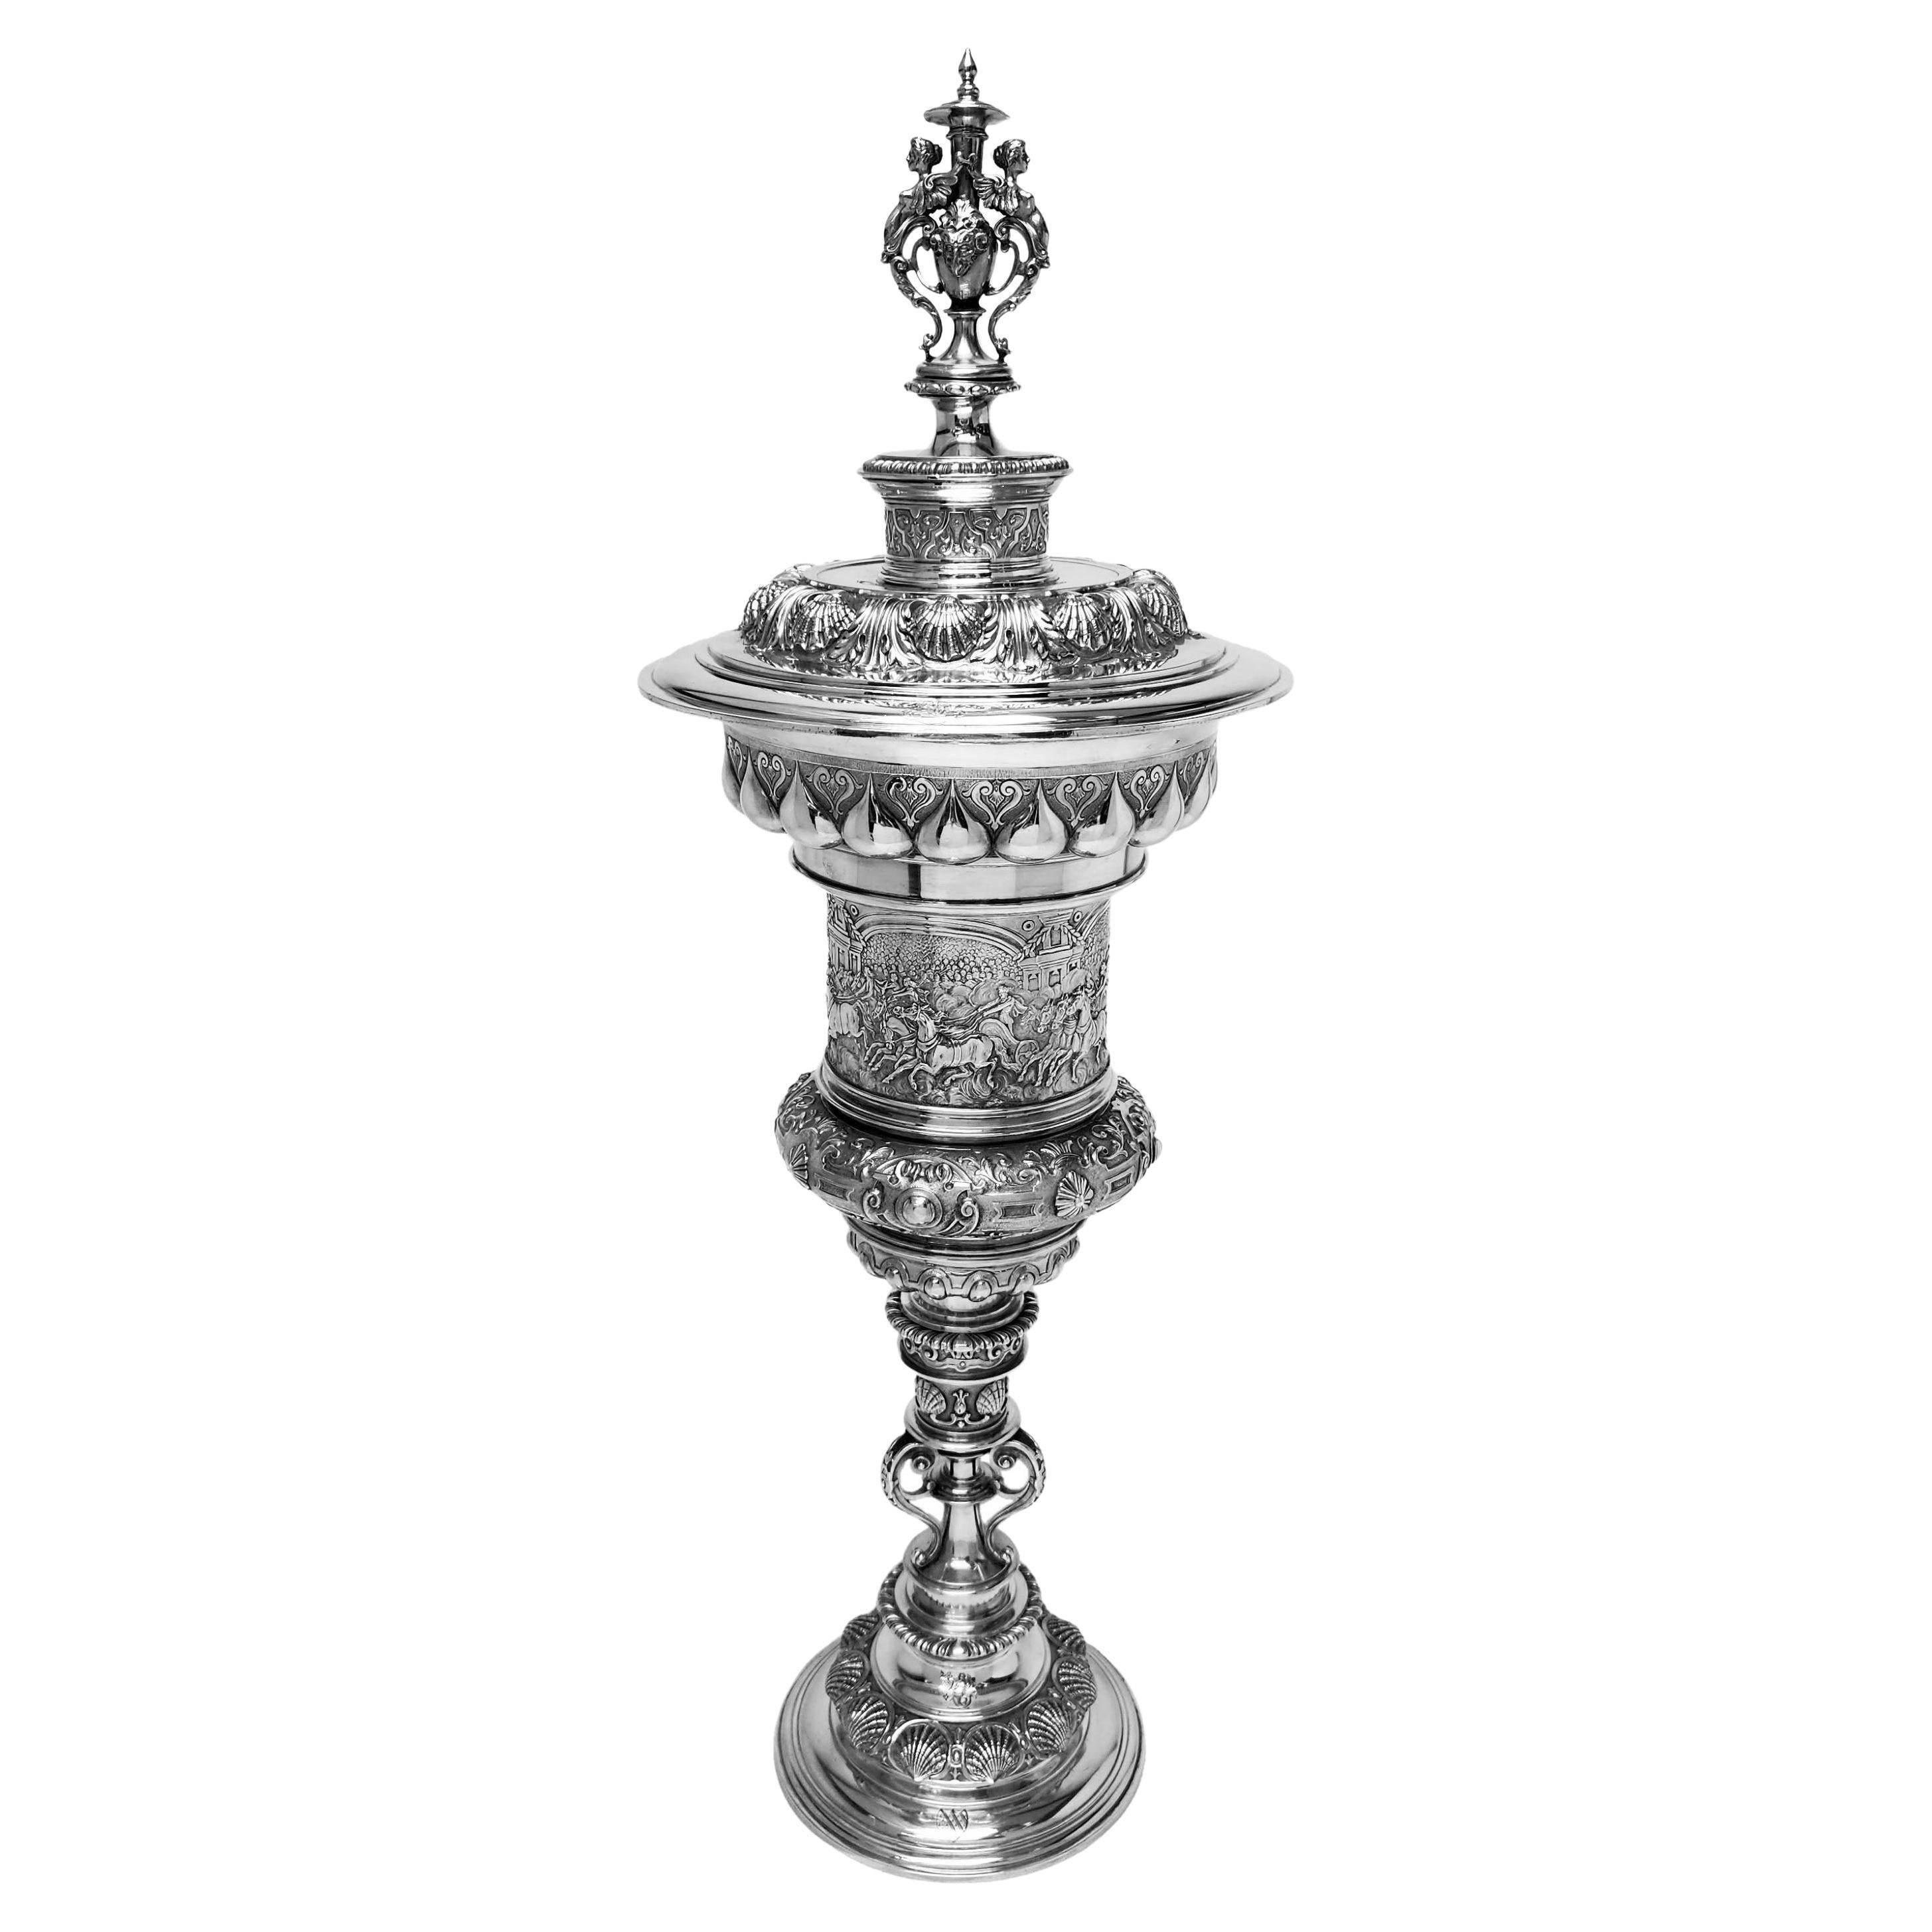 Antique Silver Steeple Cup Lidded Cup & Cover 1902 17th Century Style  en vente